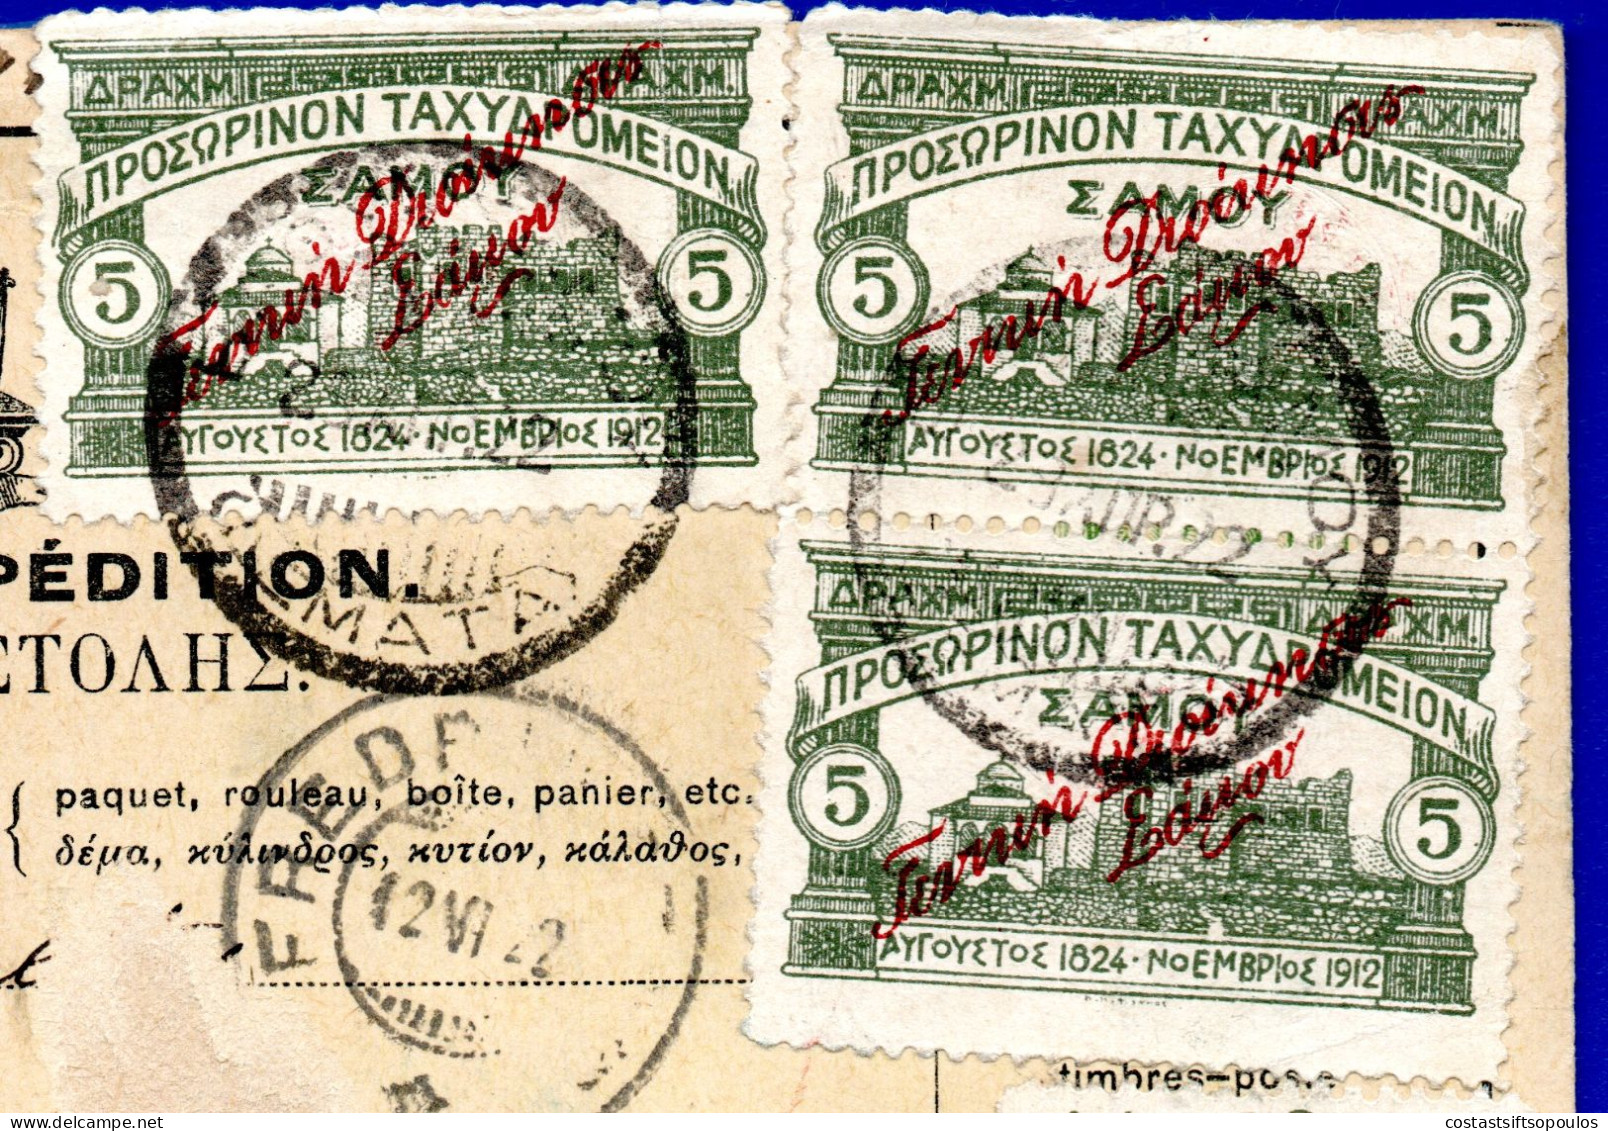 2577.GREECE,SAMOS,1915 CASTLES,SC.N106 5 DR. X 6 ON PART PARCEL RECEIPT 29/4/22(VERY LATE DAY) TO NORWAY, 6 SCANS - Samos